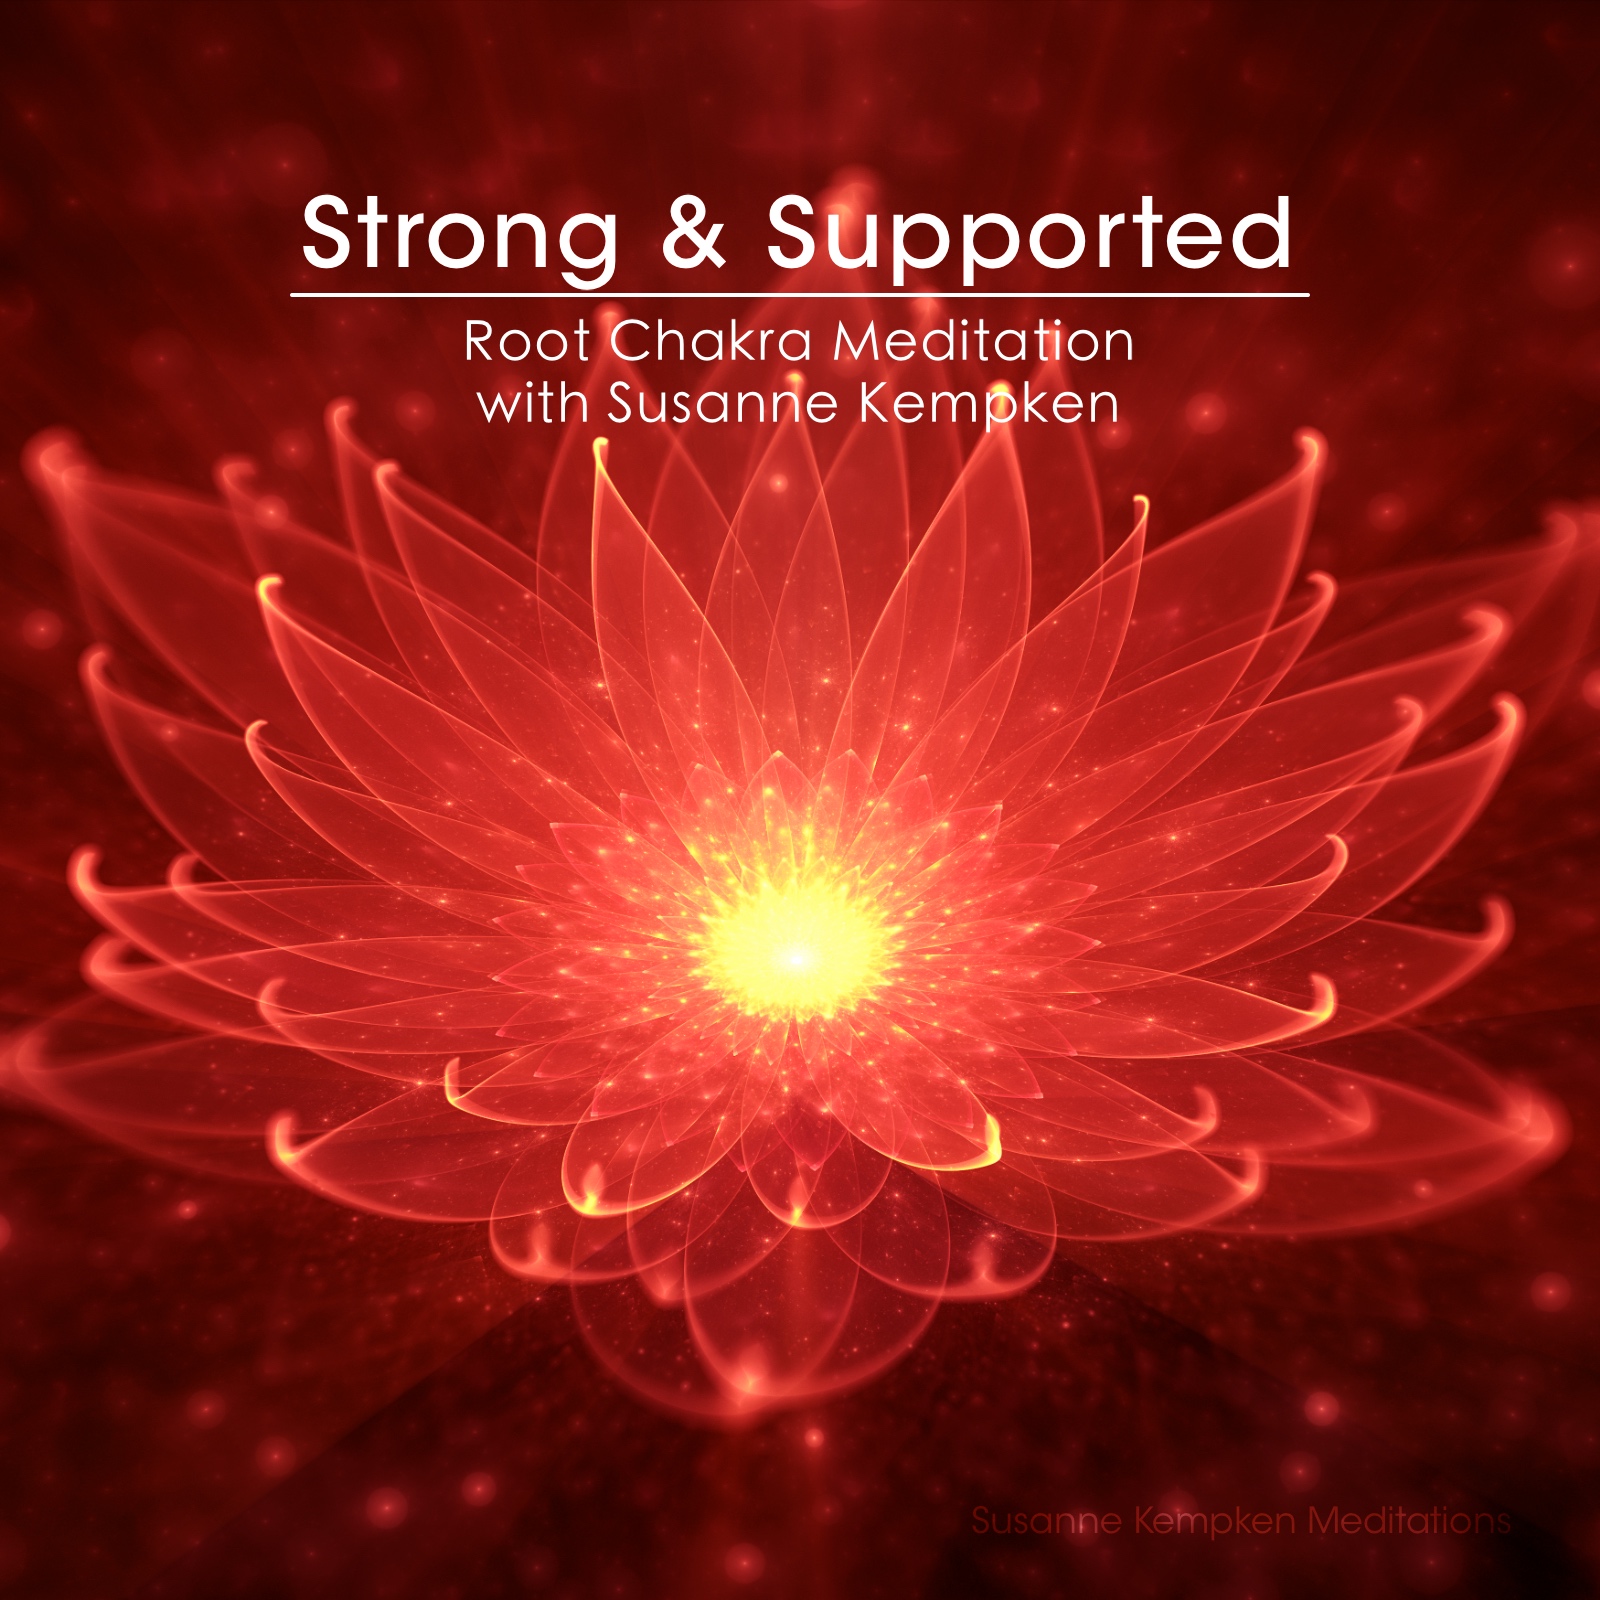 Strong & Supported - Root Chakra Meditation by Susanne Kempken